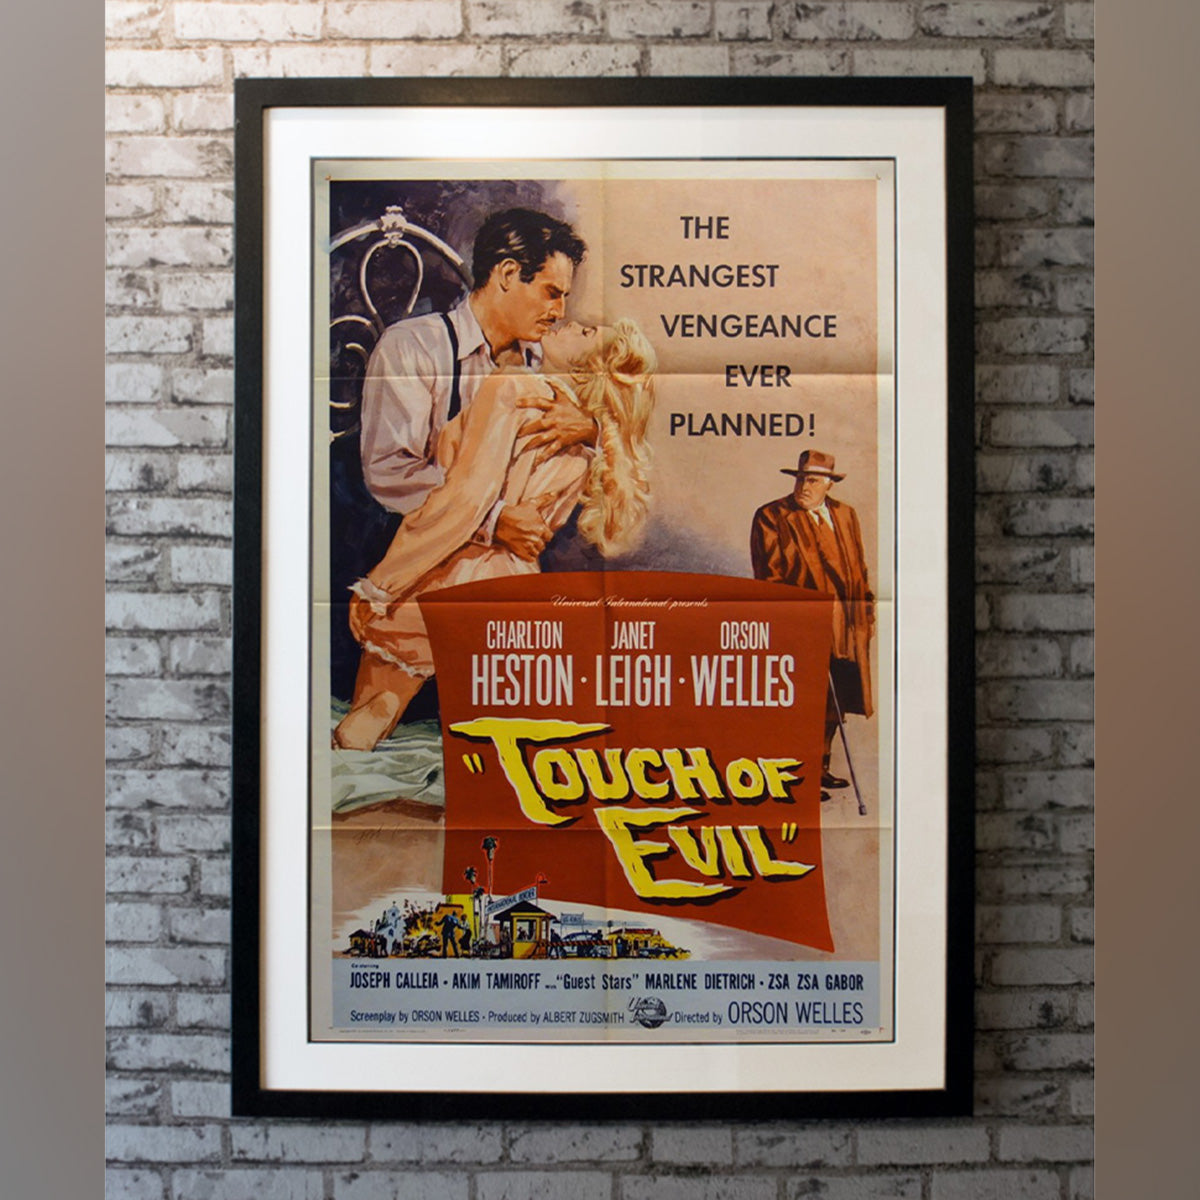 Original Movie Poster of Touch Of Evil (1958)